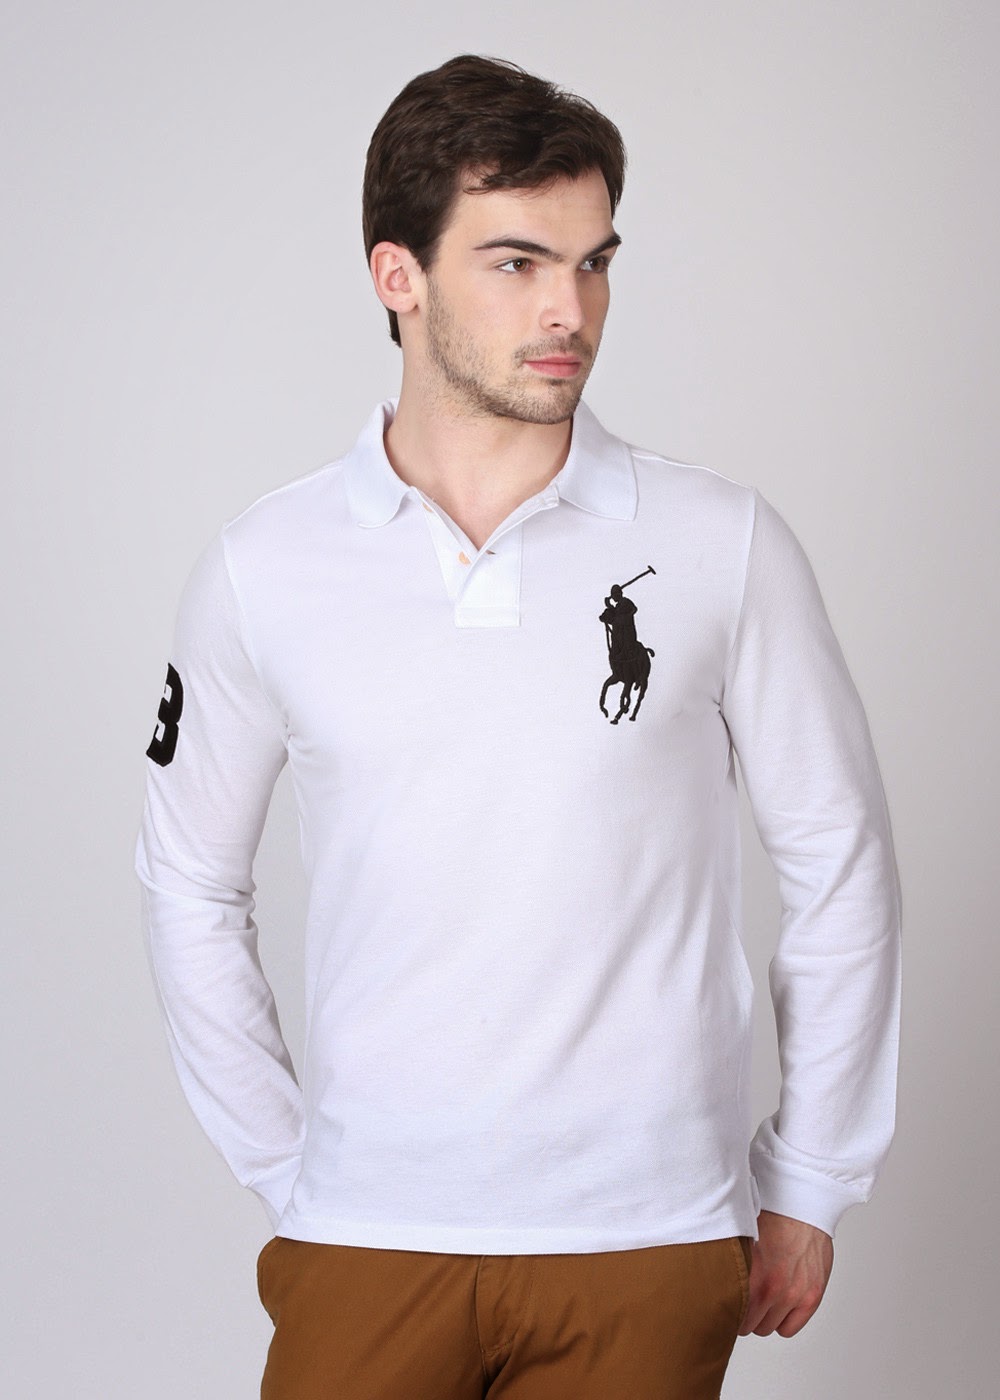 Ralph Lauren Polo T Shirts In India | Fashion's Feel | Tips and Body Care